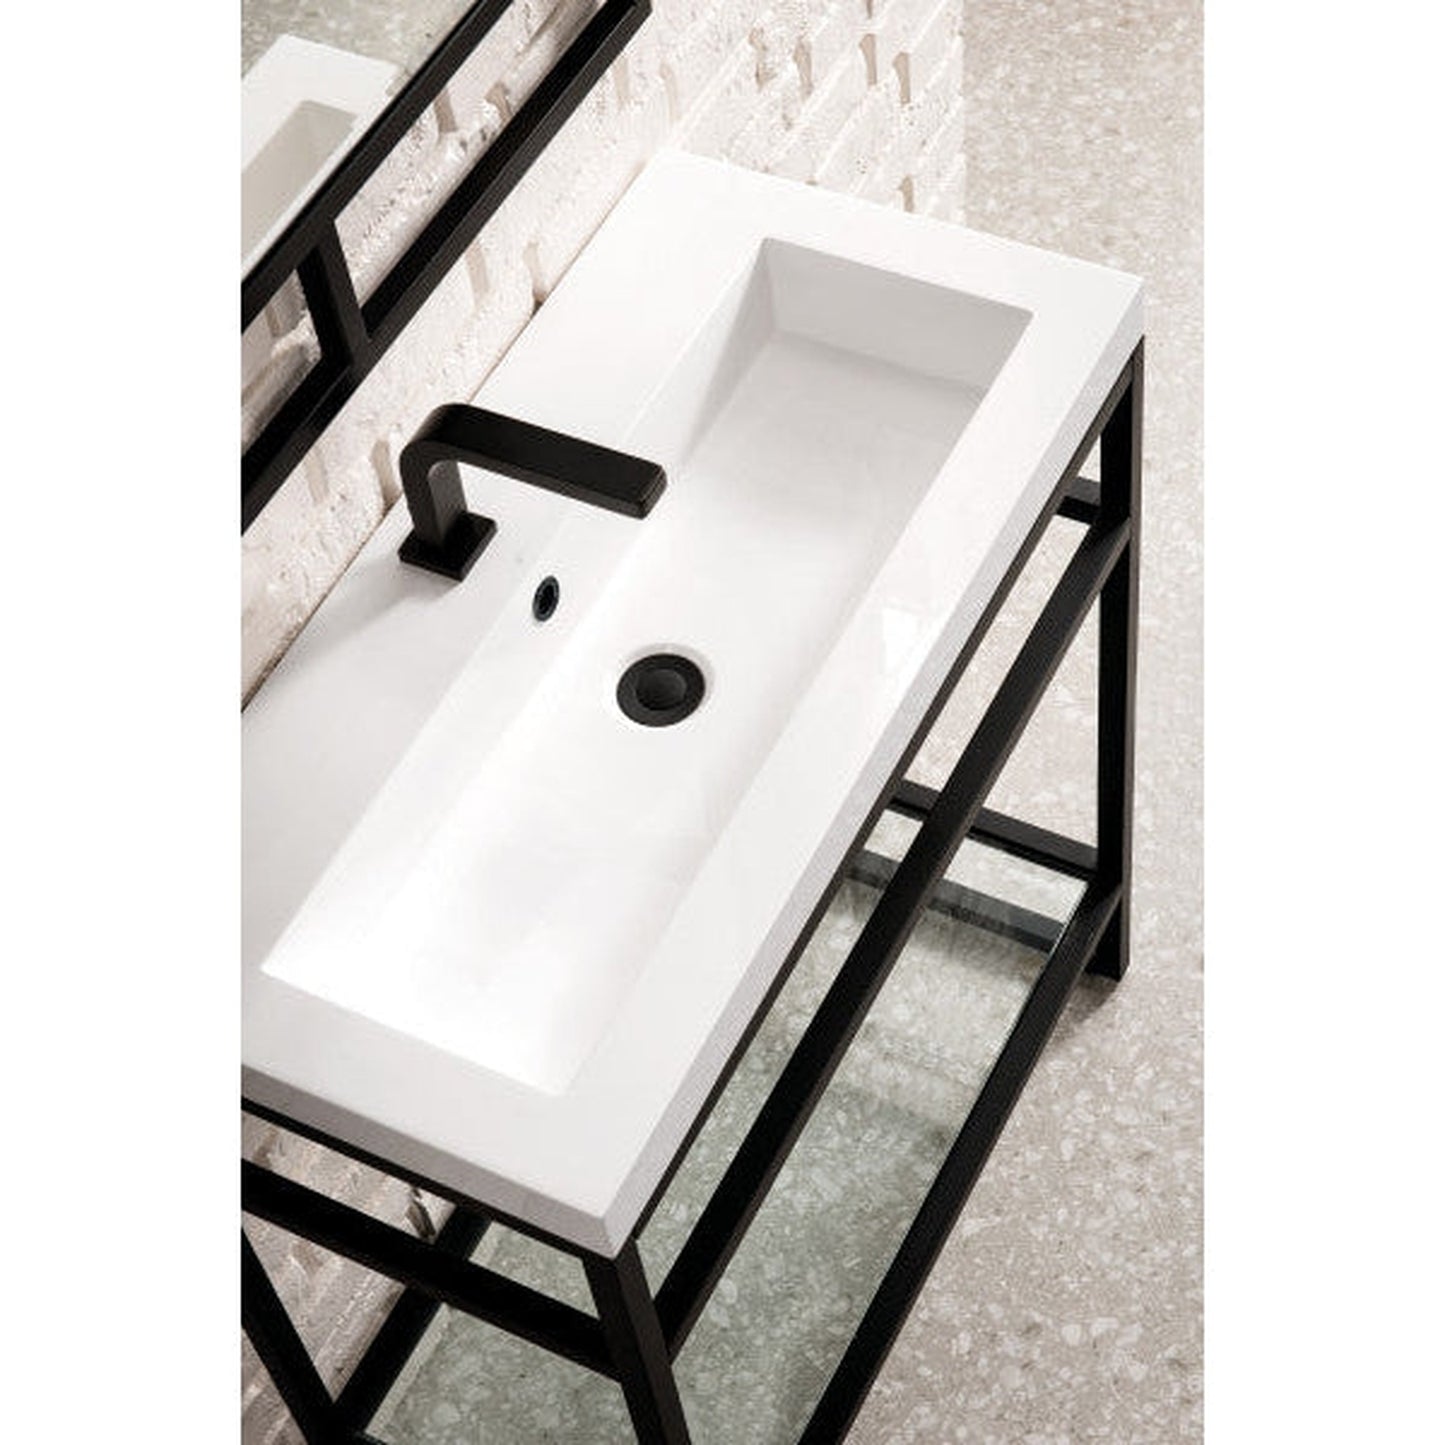 James Martin Boston 32" Single Matte Black Stainless Steel Console Sink With White Glossy Composite Countertop